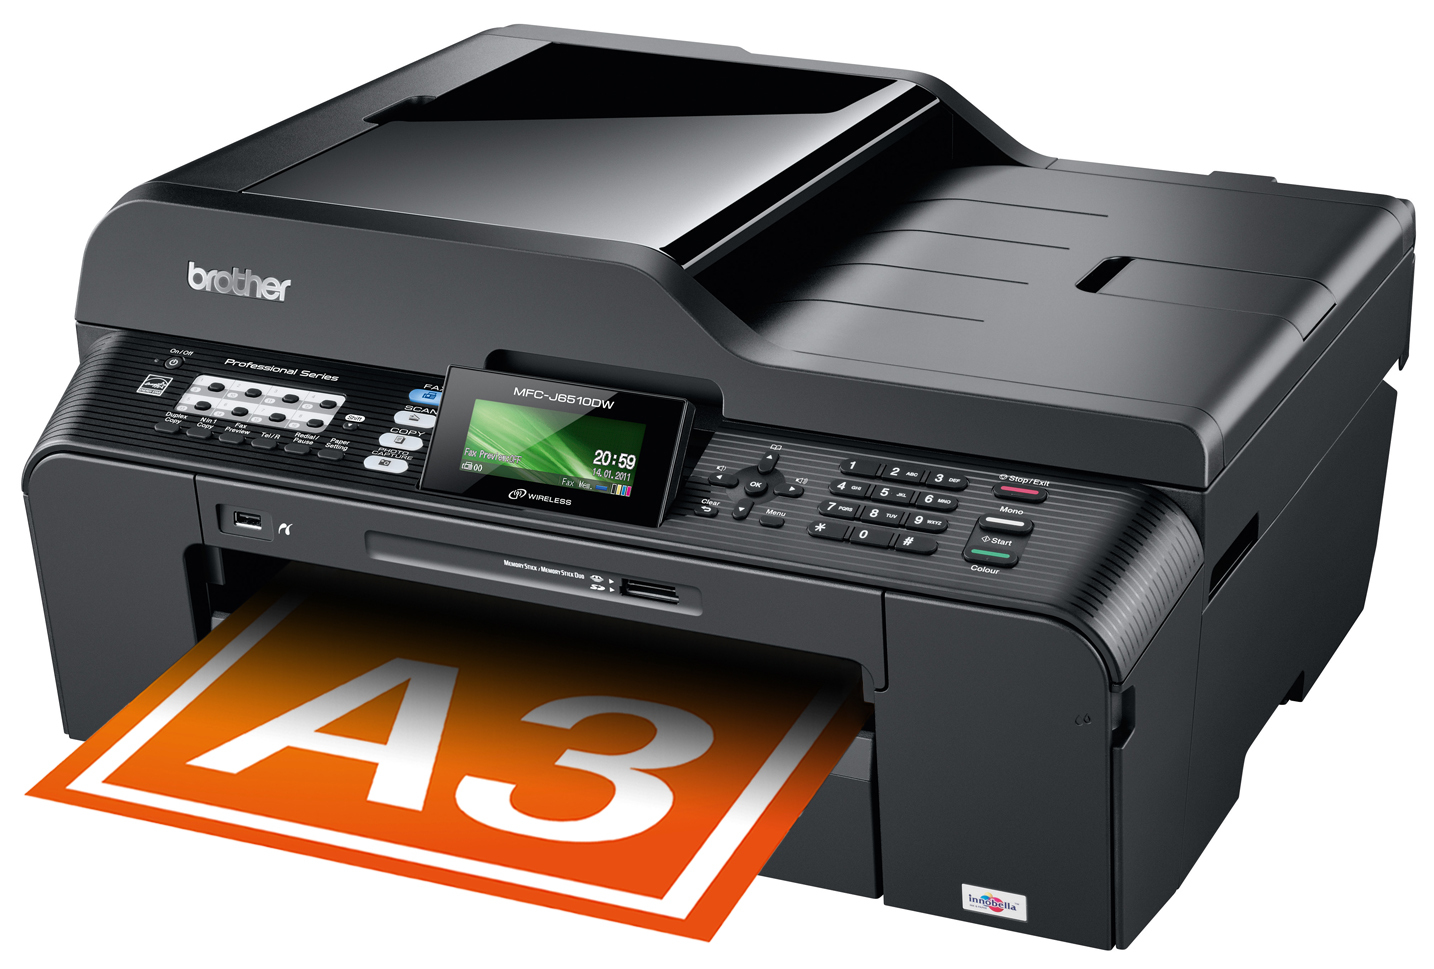 Brother MFC-J6510dw Printer - Refurbished with 3 months RTB Warranty